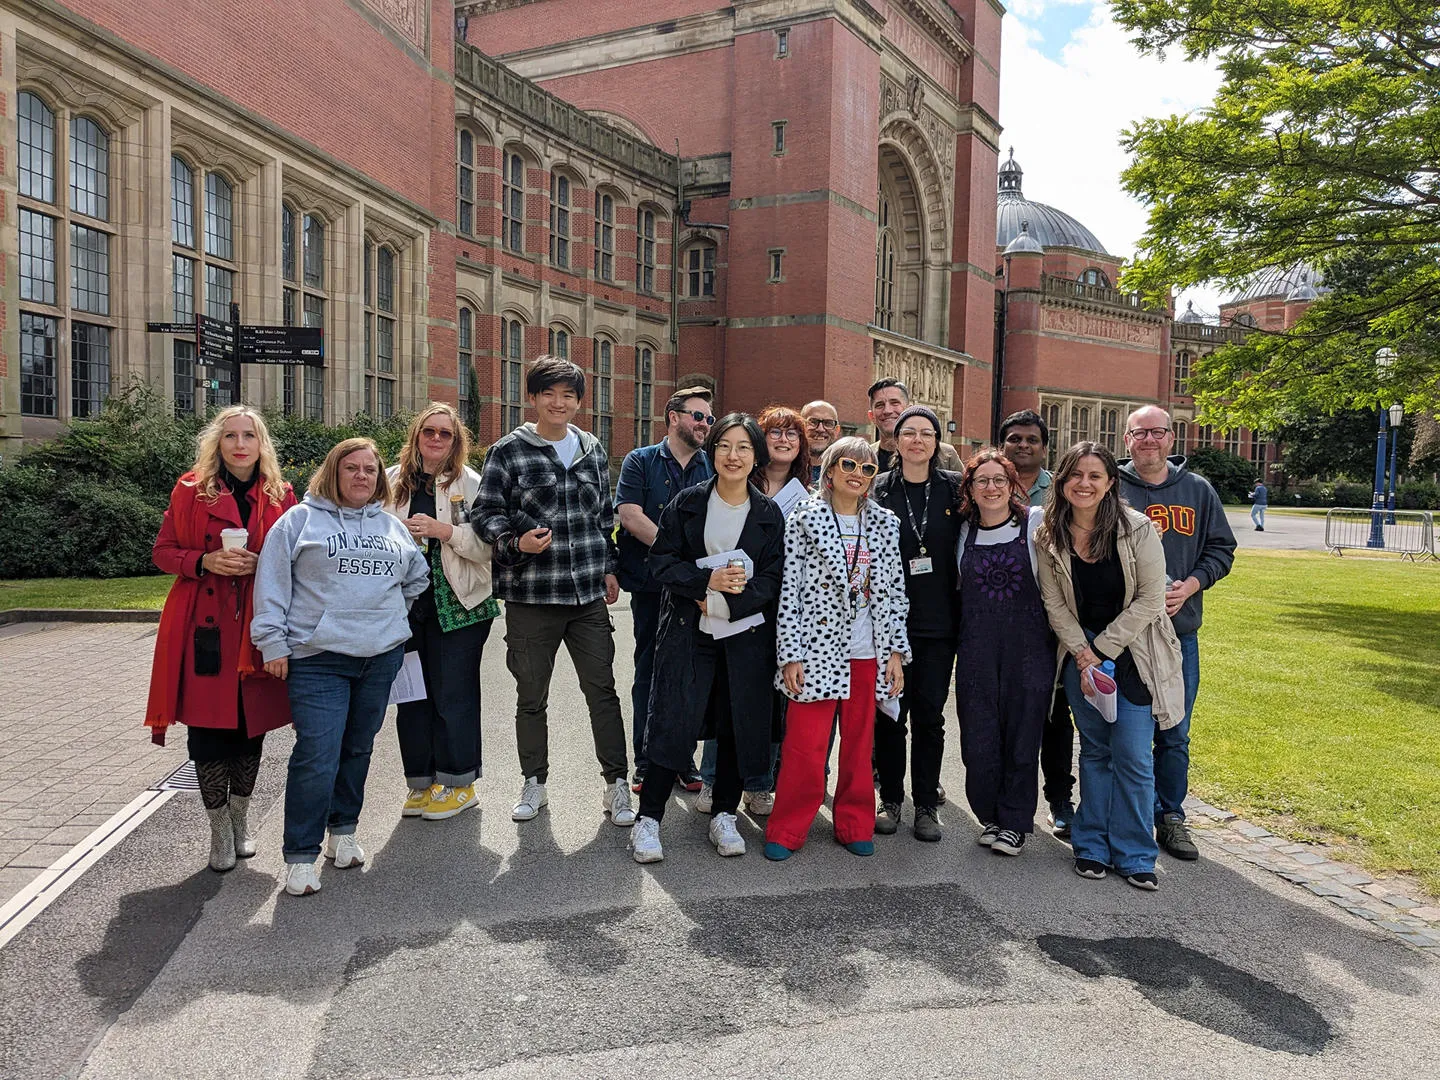 A group of postgraduate students lined up for a group photo in front of the University of Birmingham's redbrick buildings